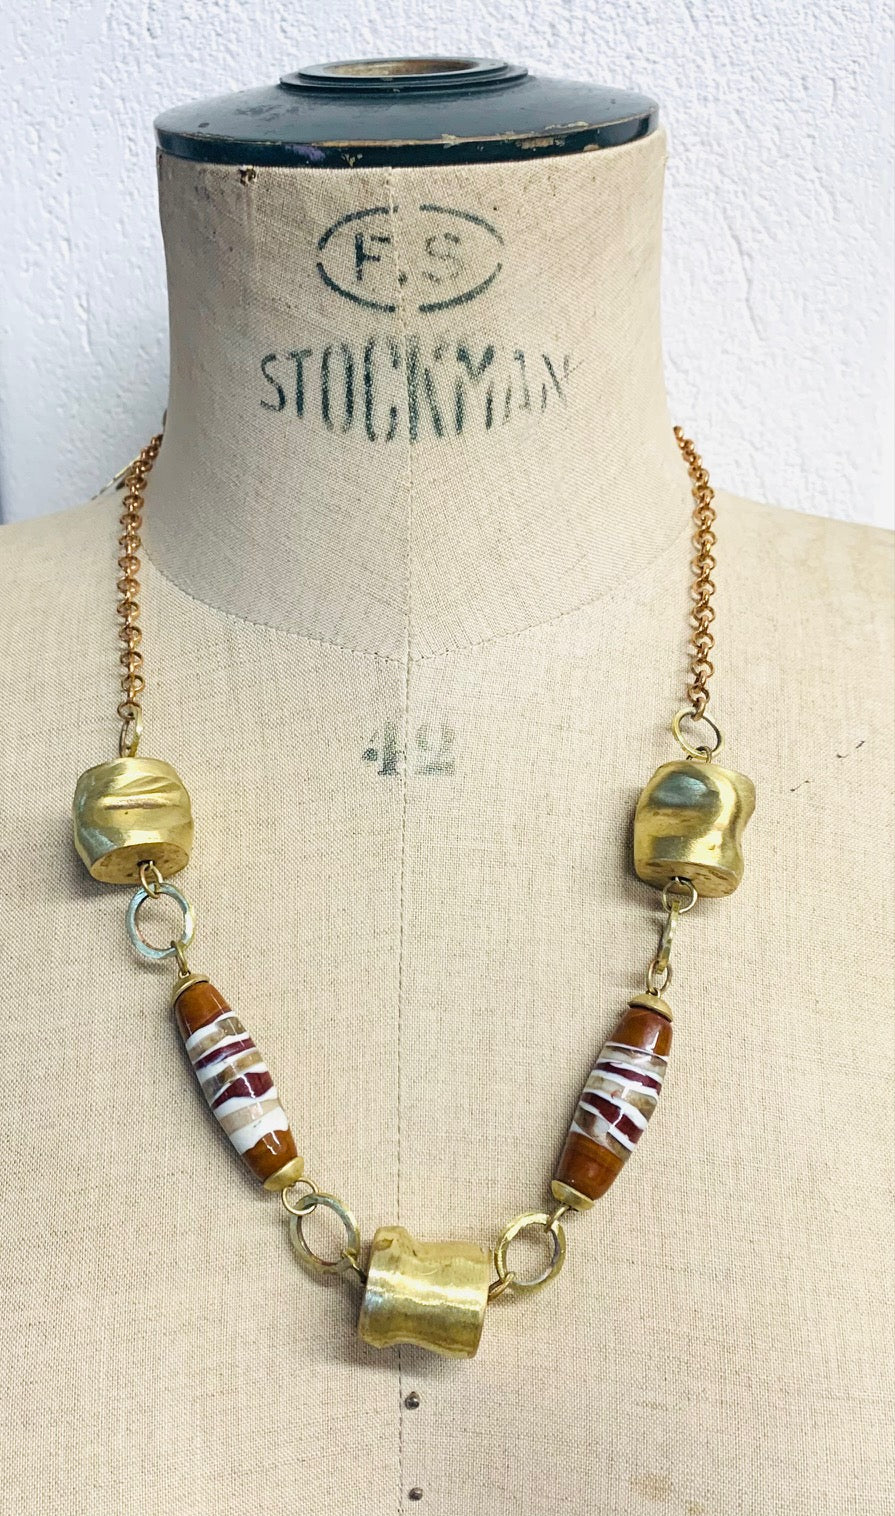 Murano glass and brass beads short necklace